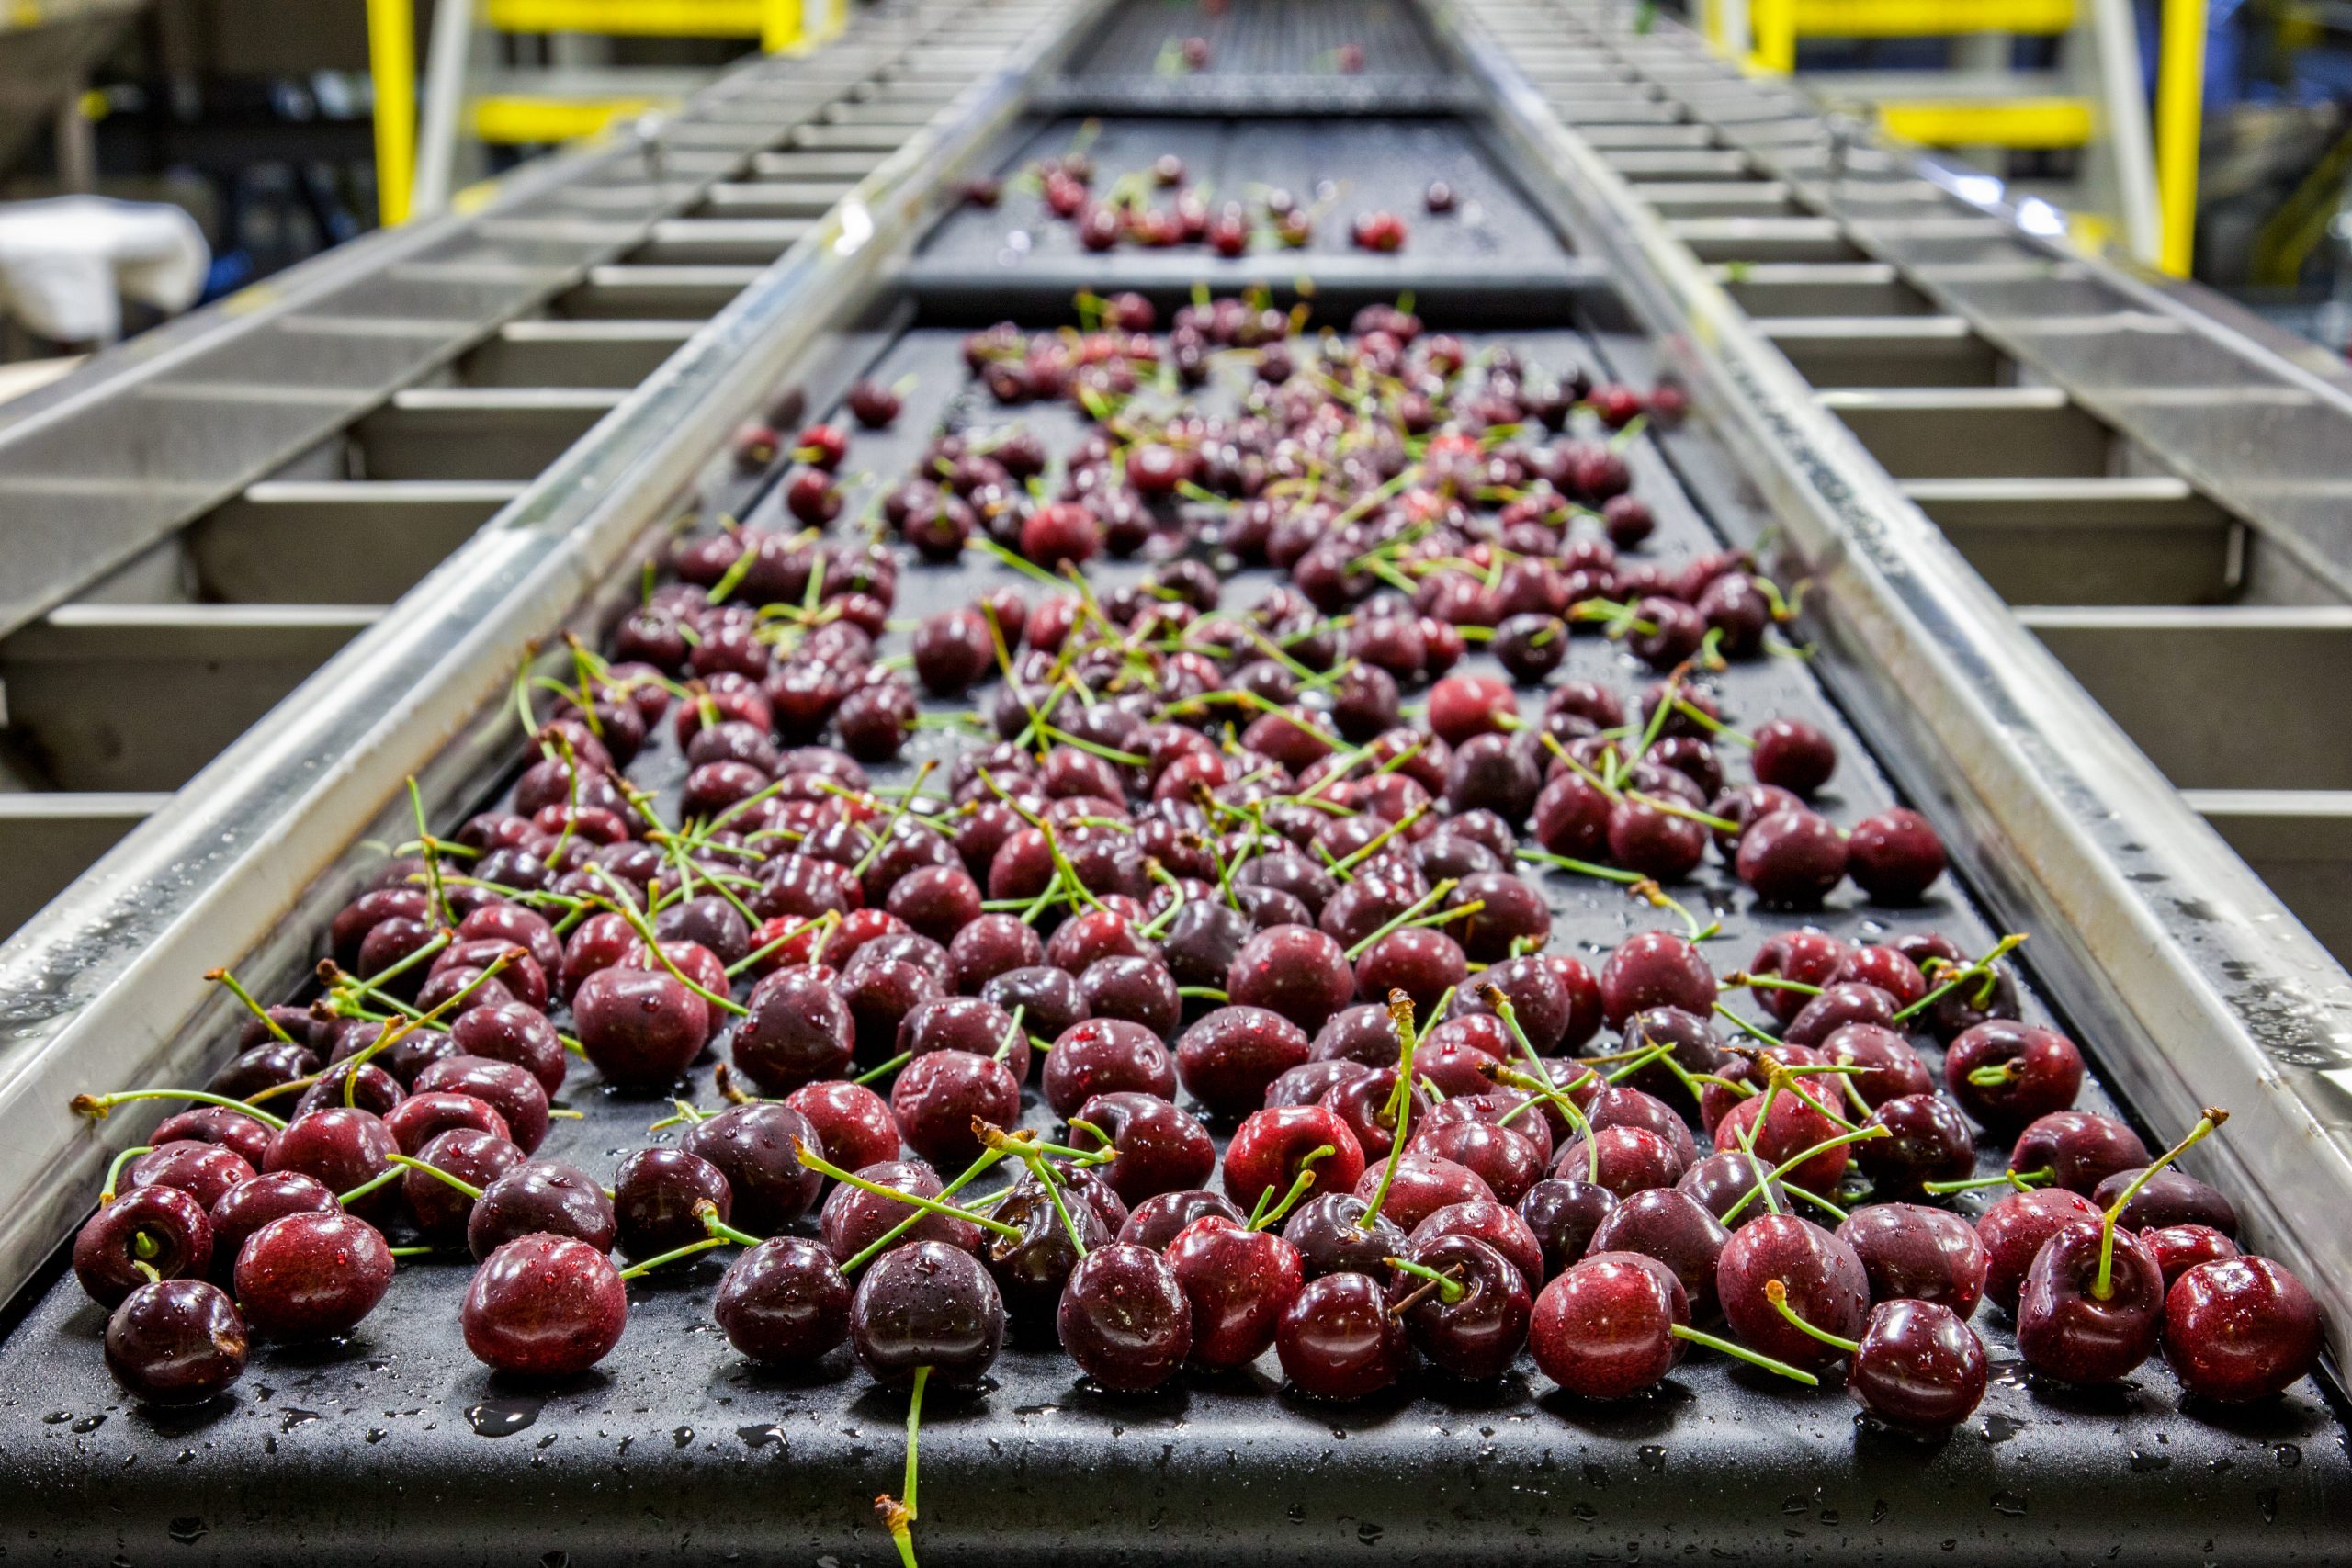 Red,Ripe,Cherries,On,A,Wet,Conveyor,Belt,In,A